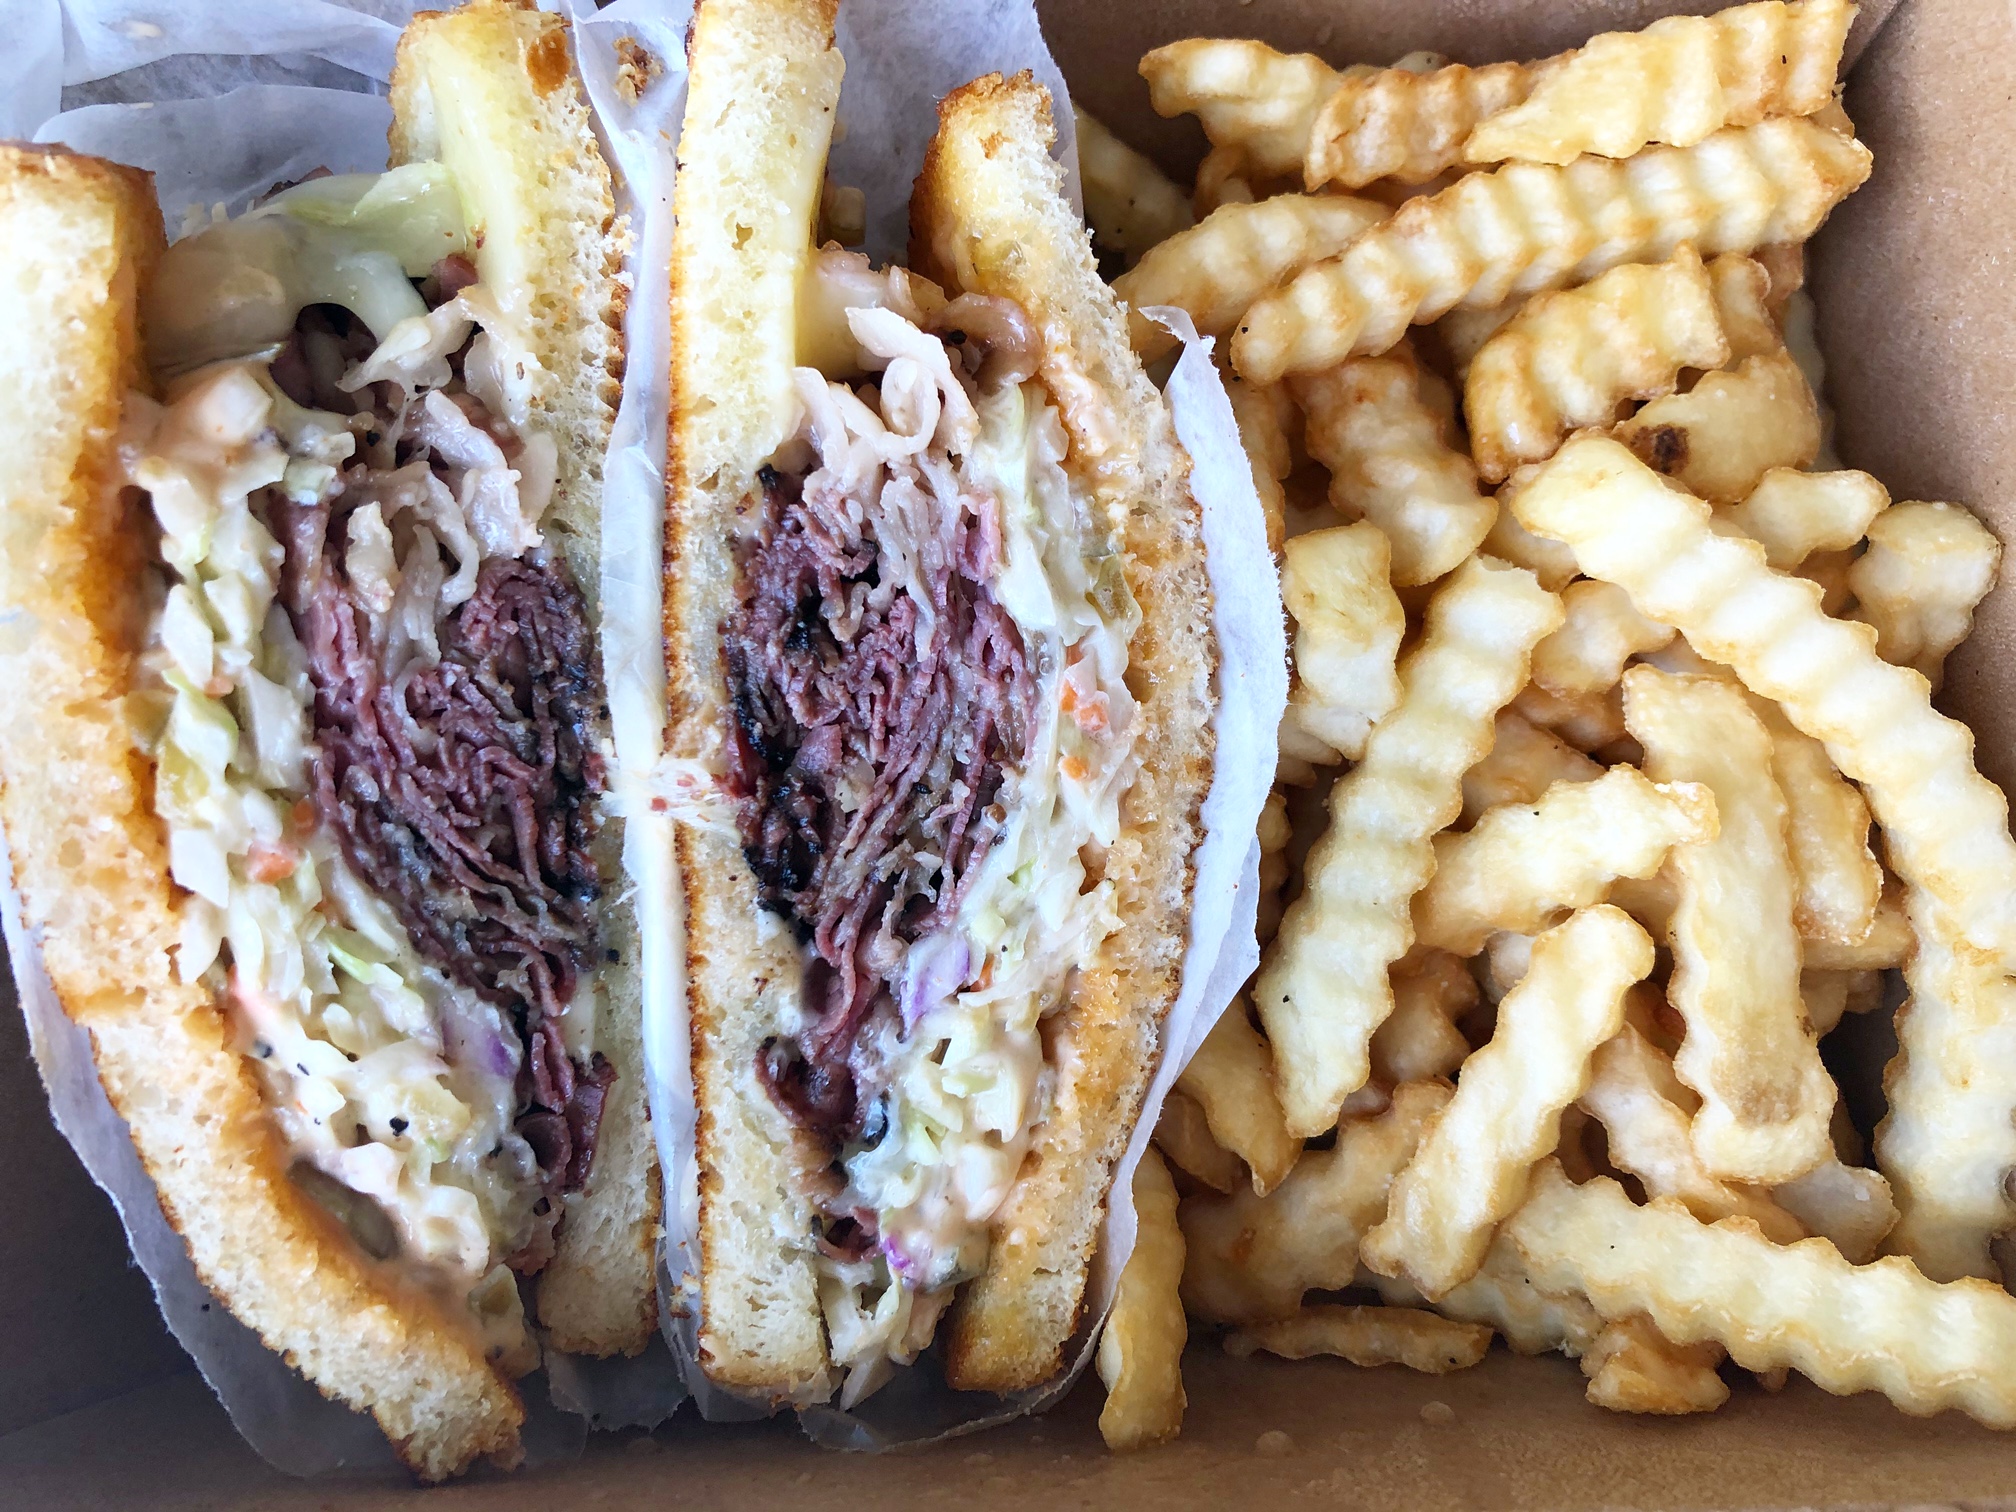 A pastrami sandwich is sliced in half and wrapped in parchment paper beside crinkle cut fries in a brown cardboard takeout box. Photo by Alyssa Buckley.